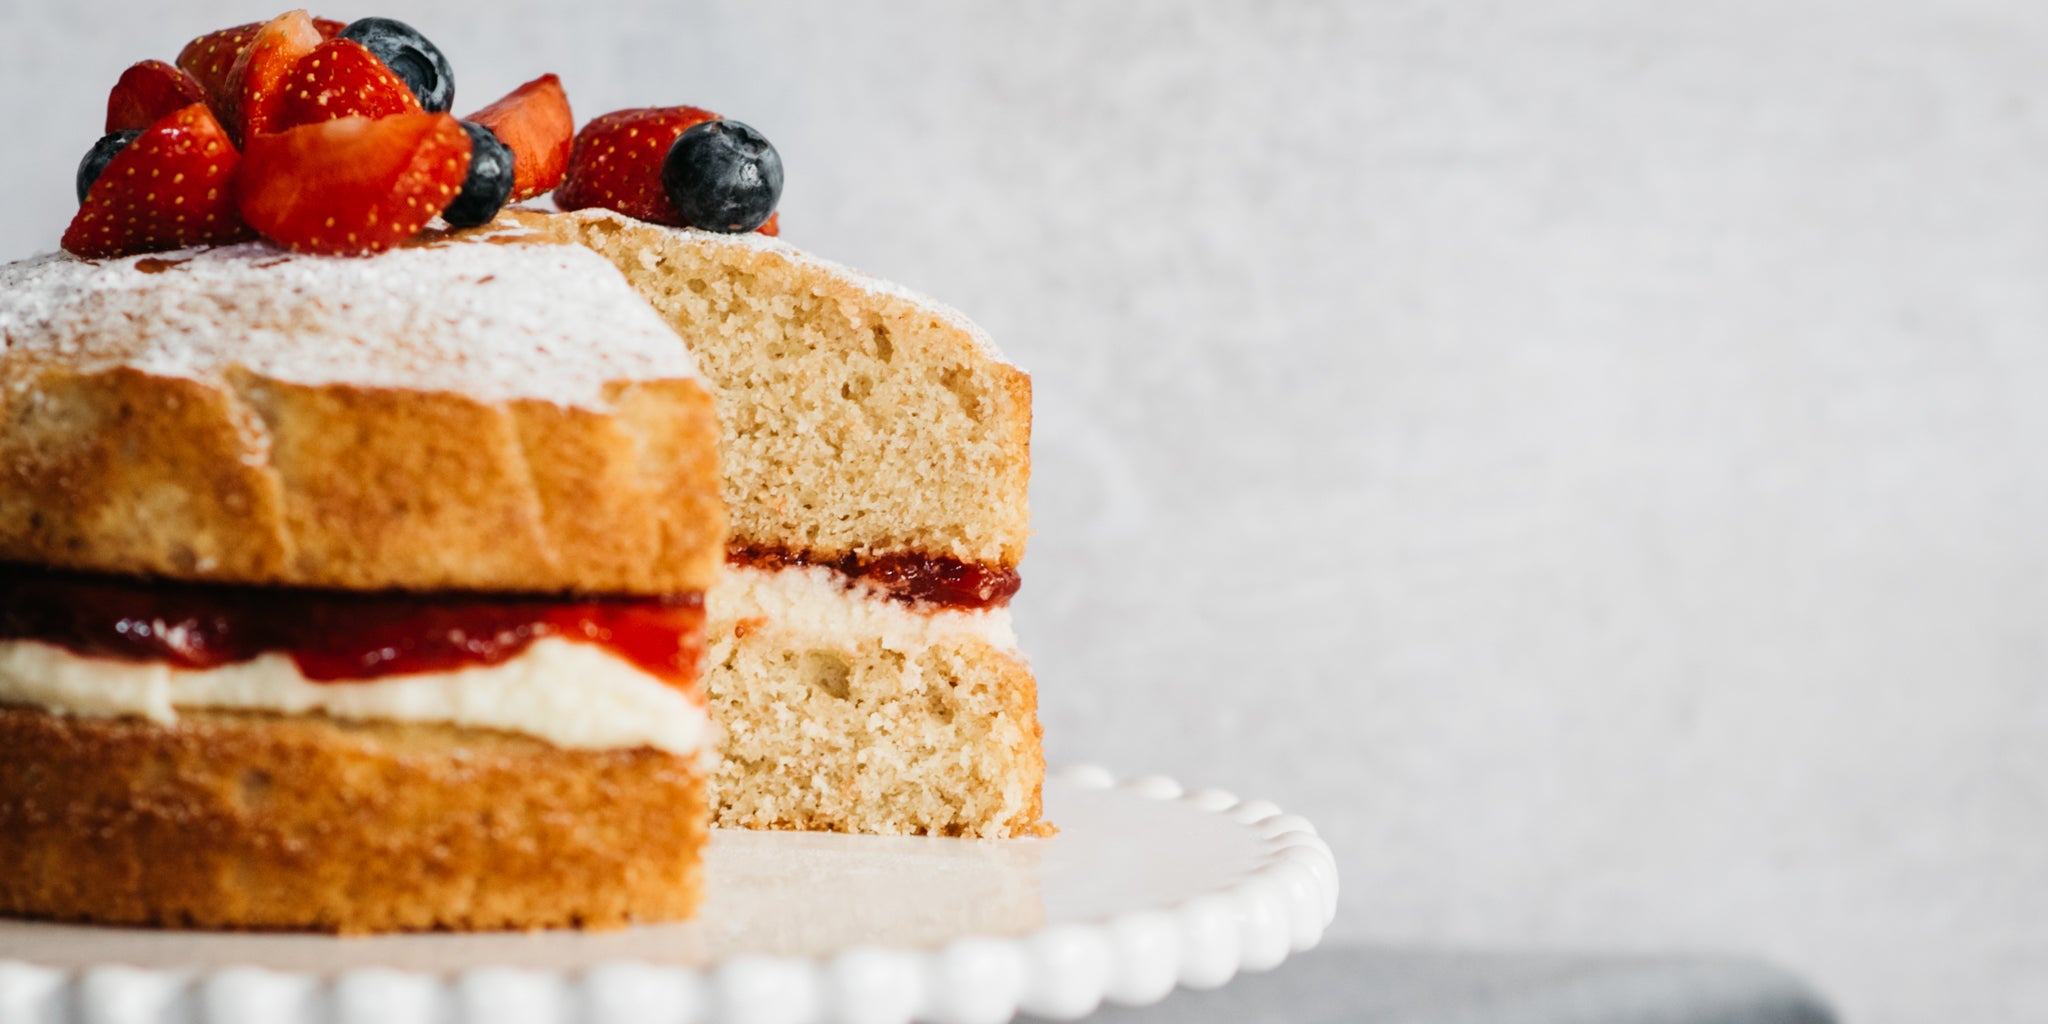 Close up of a Wholemeal Victoria Sponge with a slice cut out of it showing the moist inside filled with cream and jam